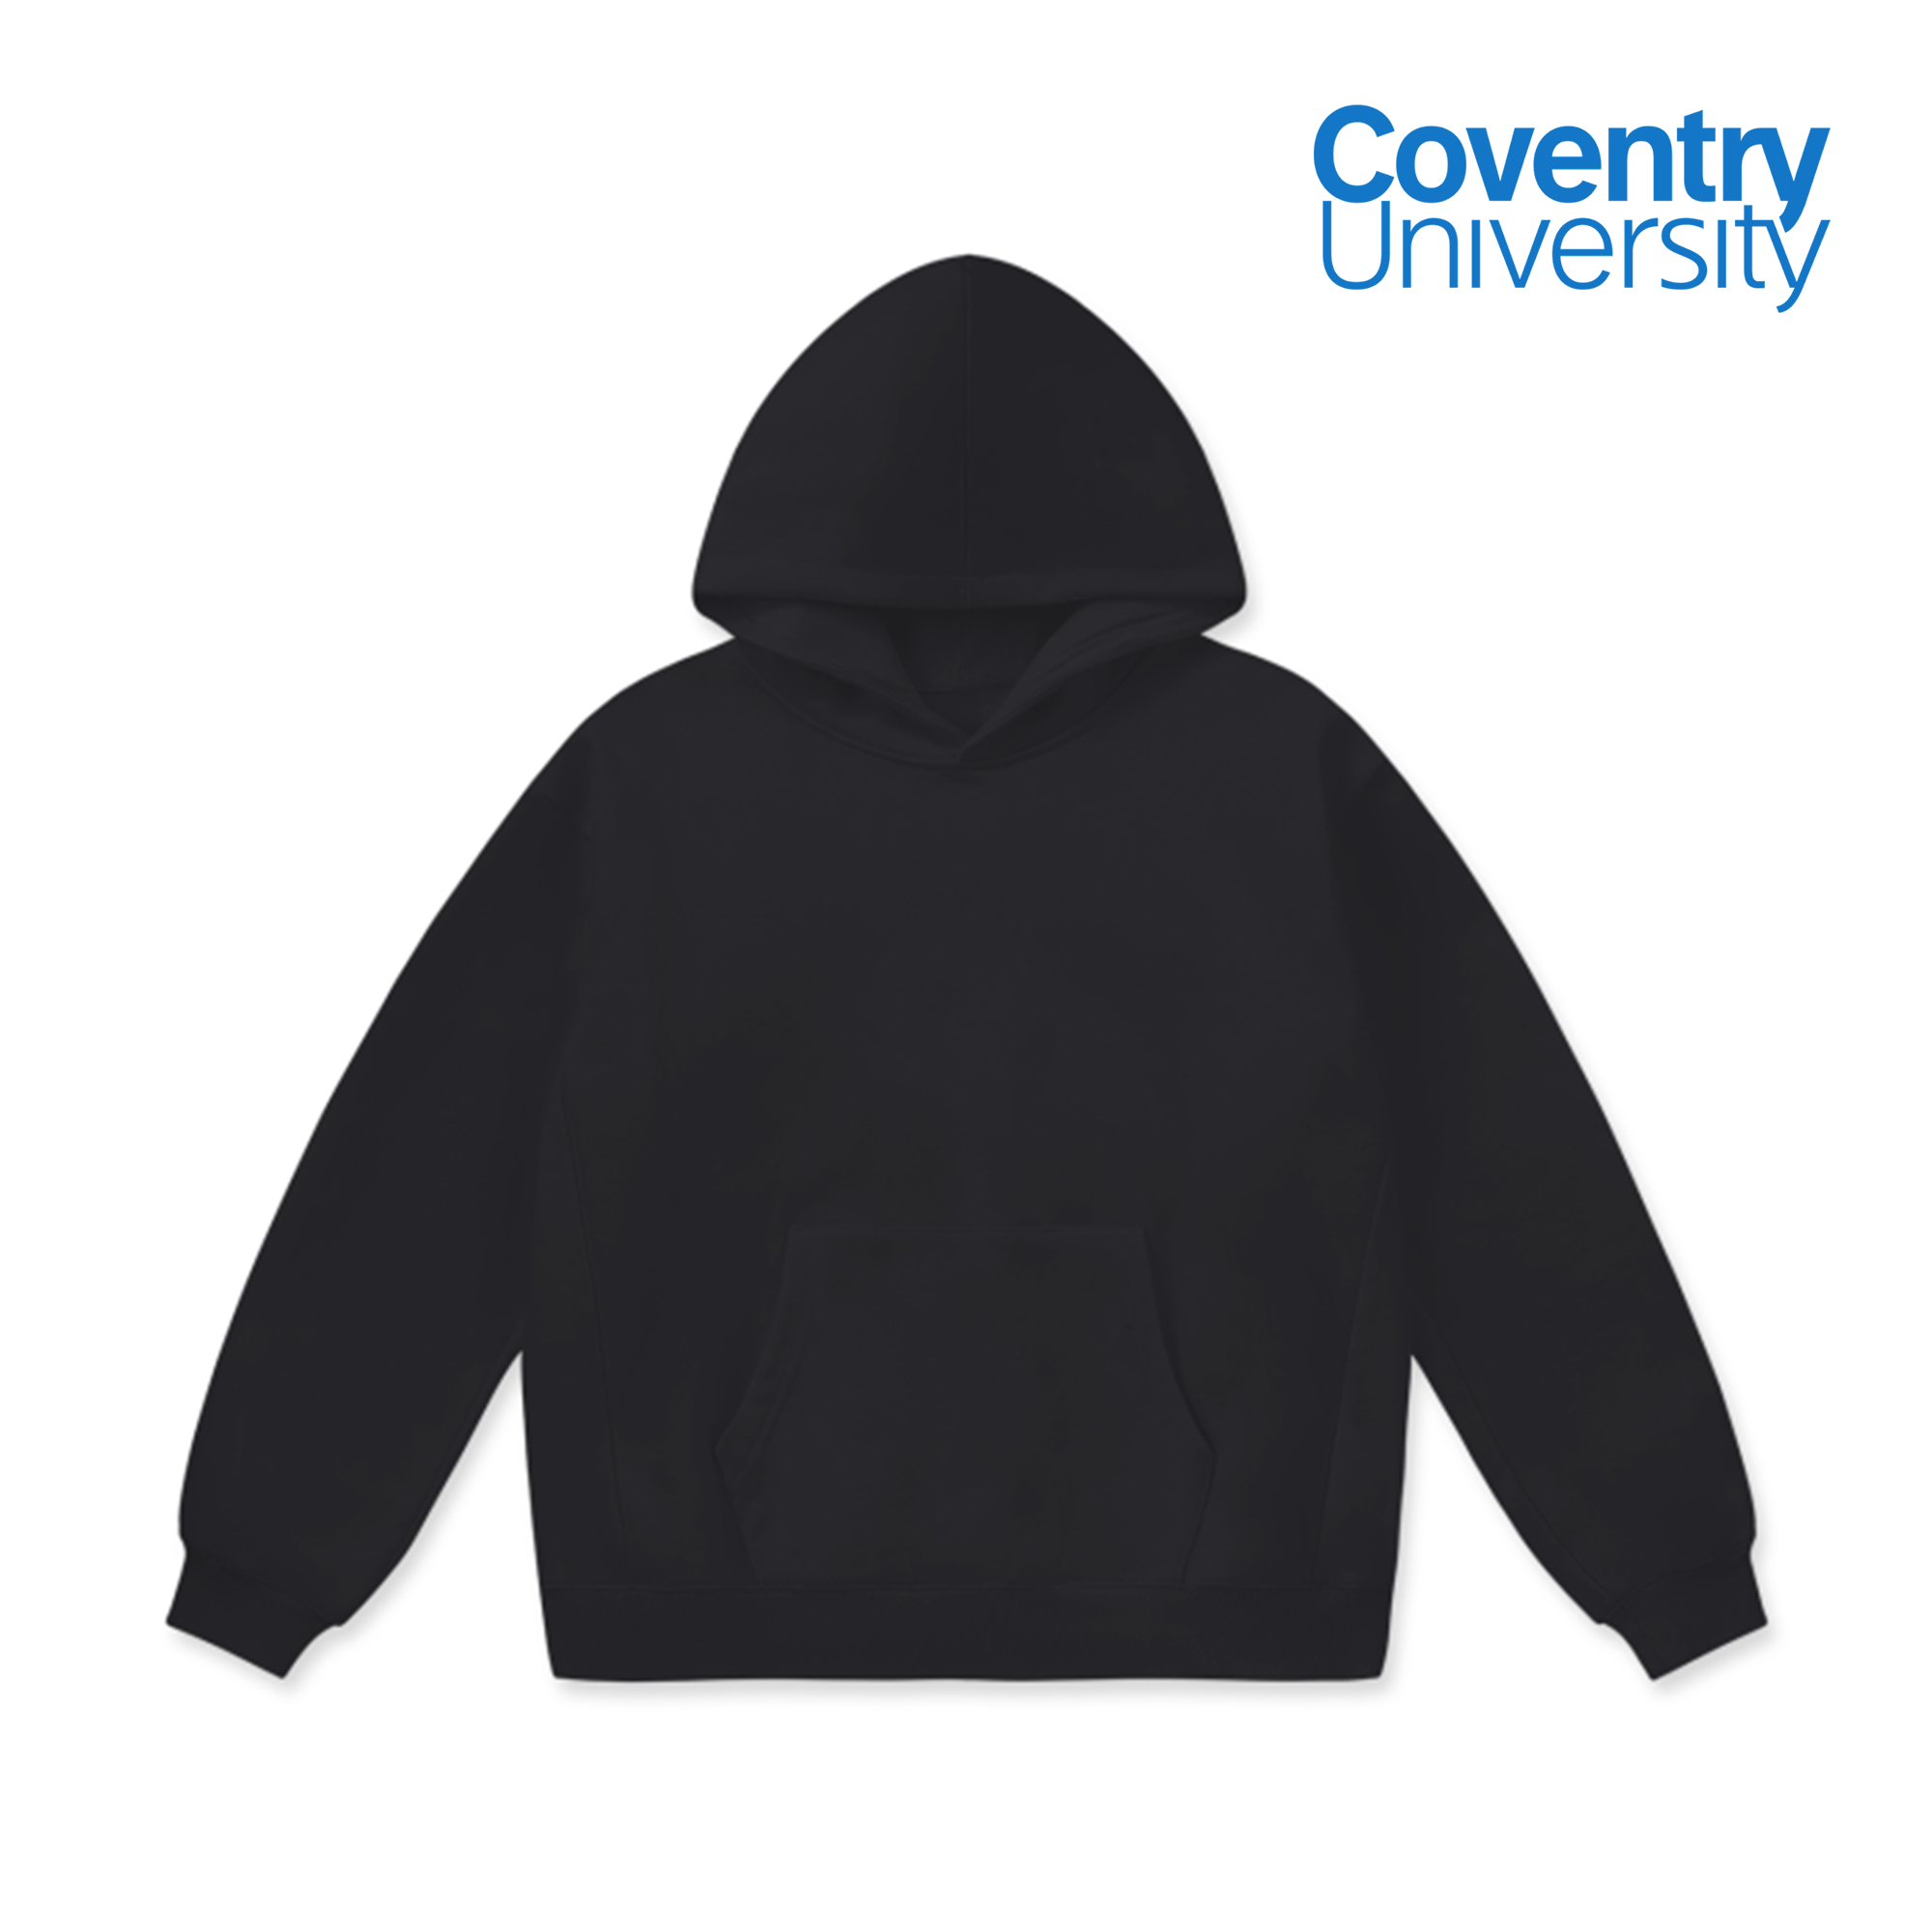 LCC Super Weighted Hoodie - Coventry University (Modern)